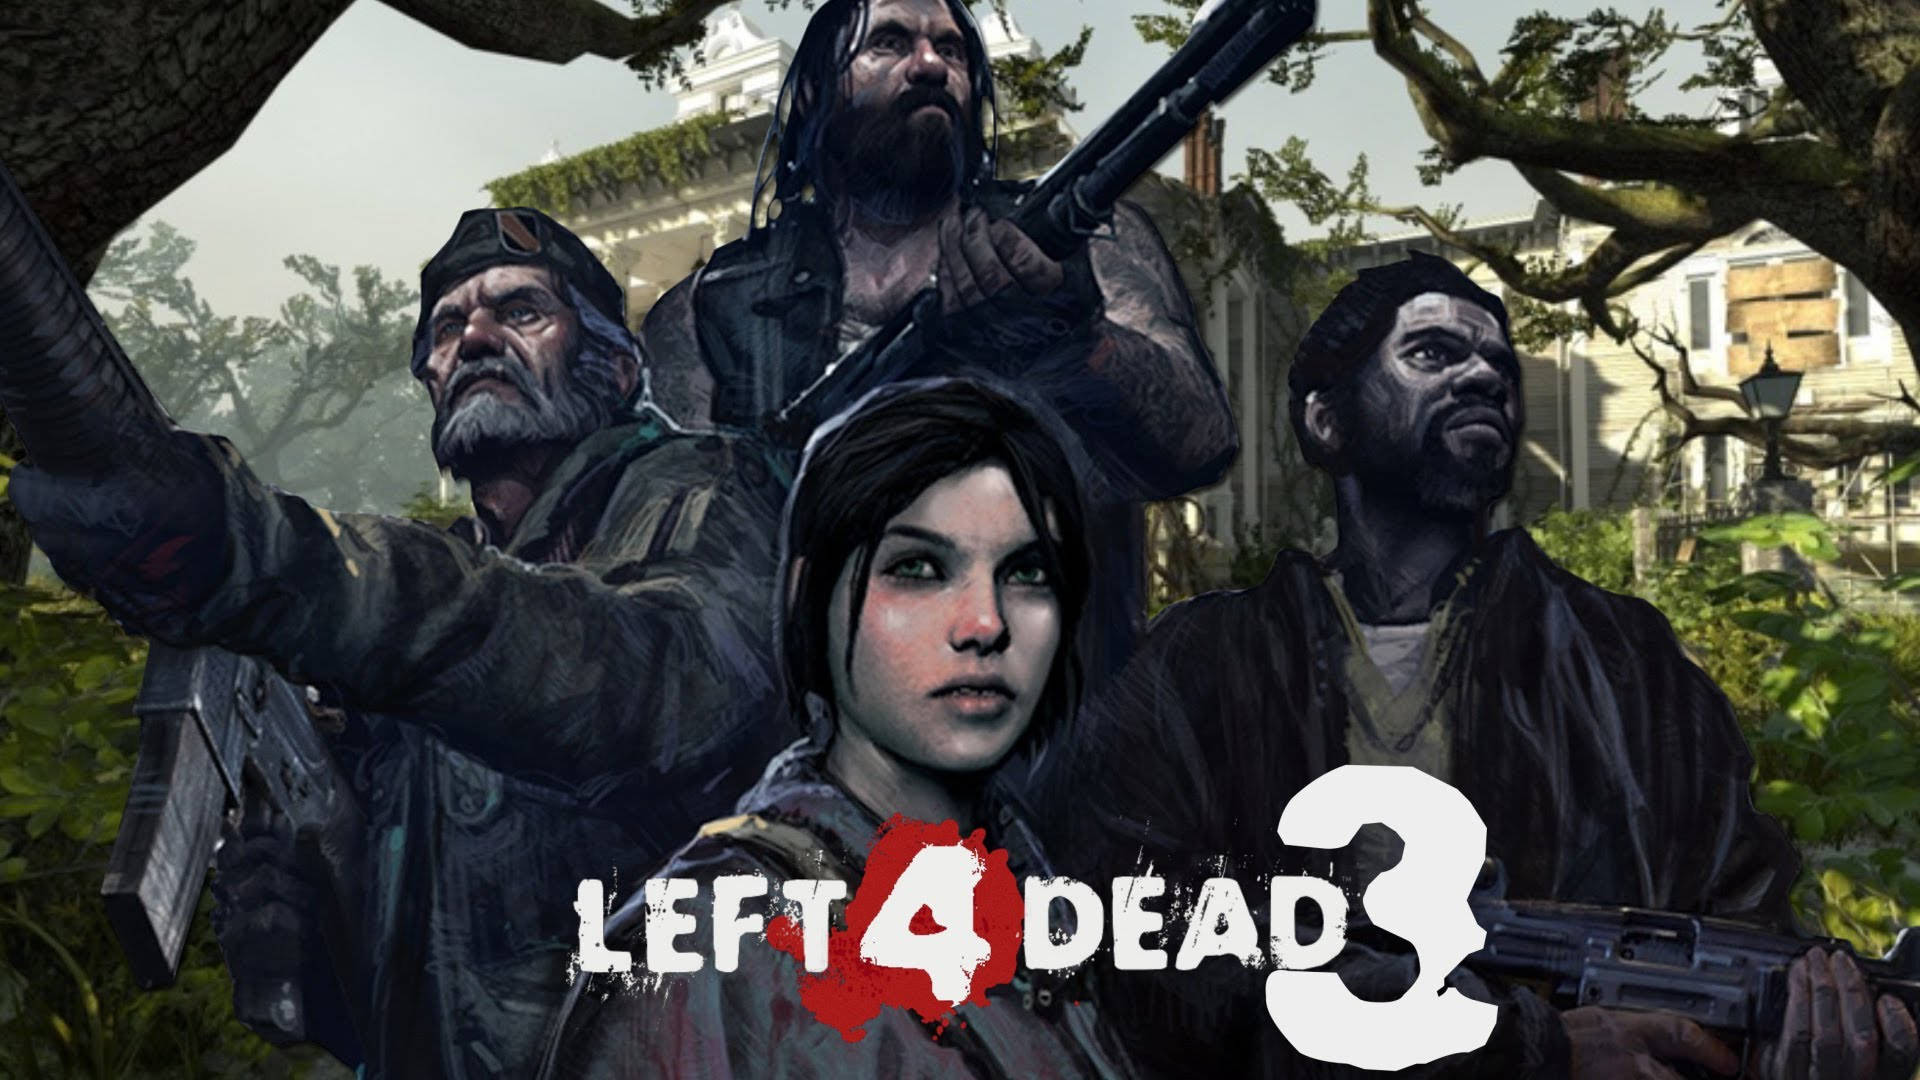 Left 4 Dead 3 Character Poster